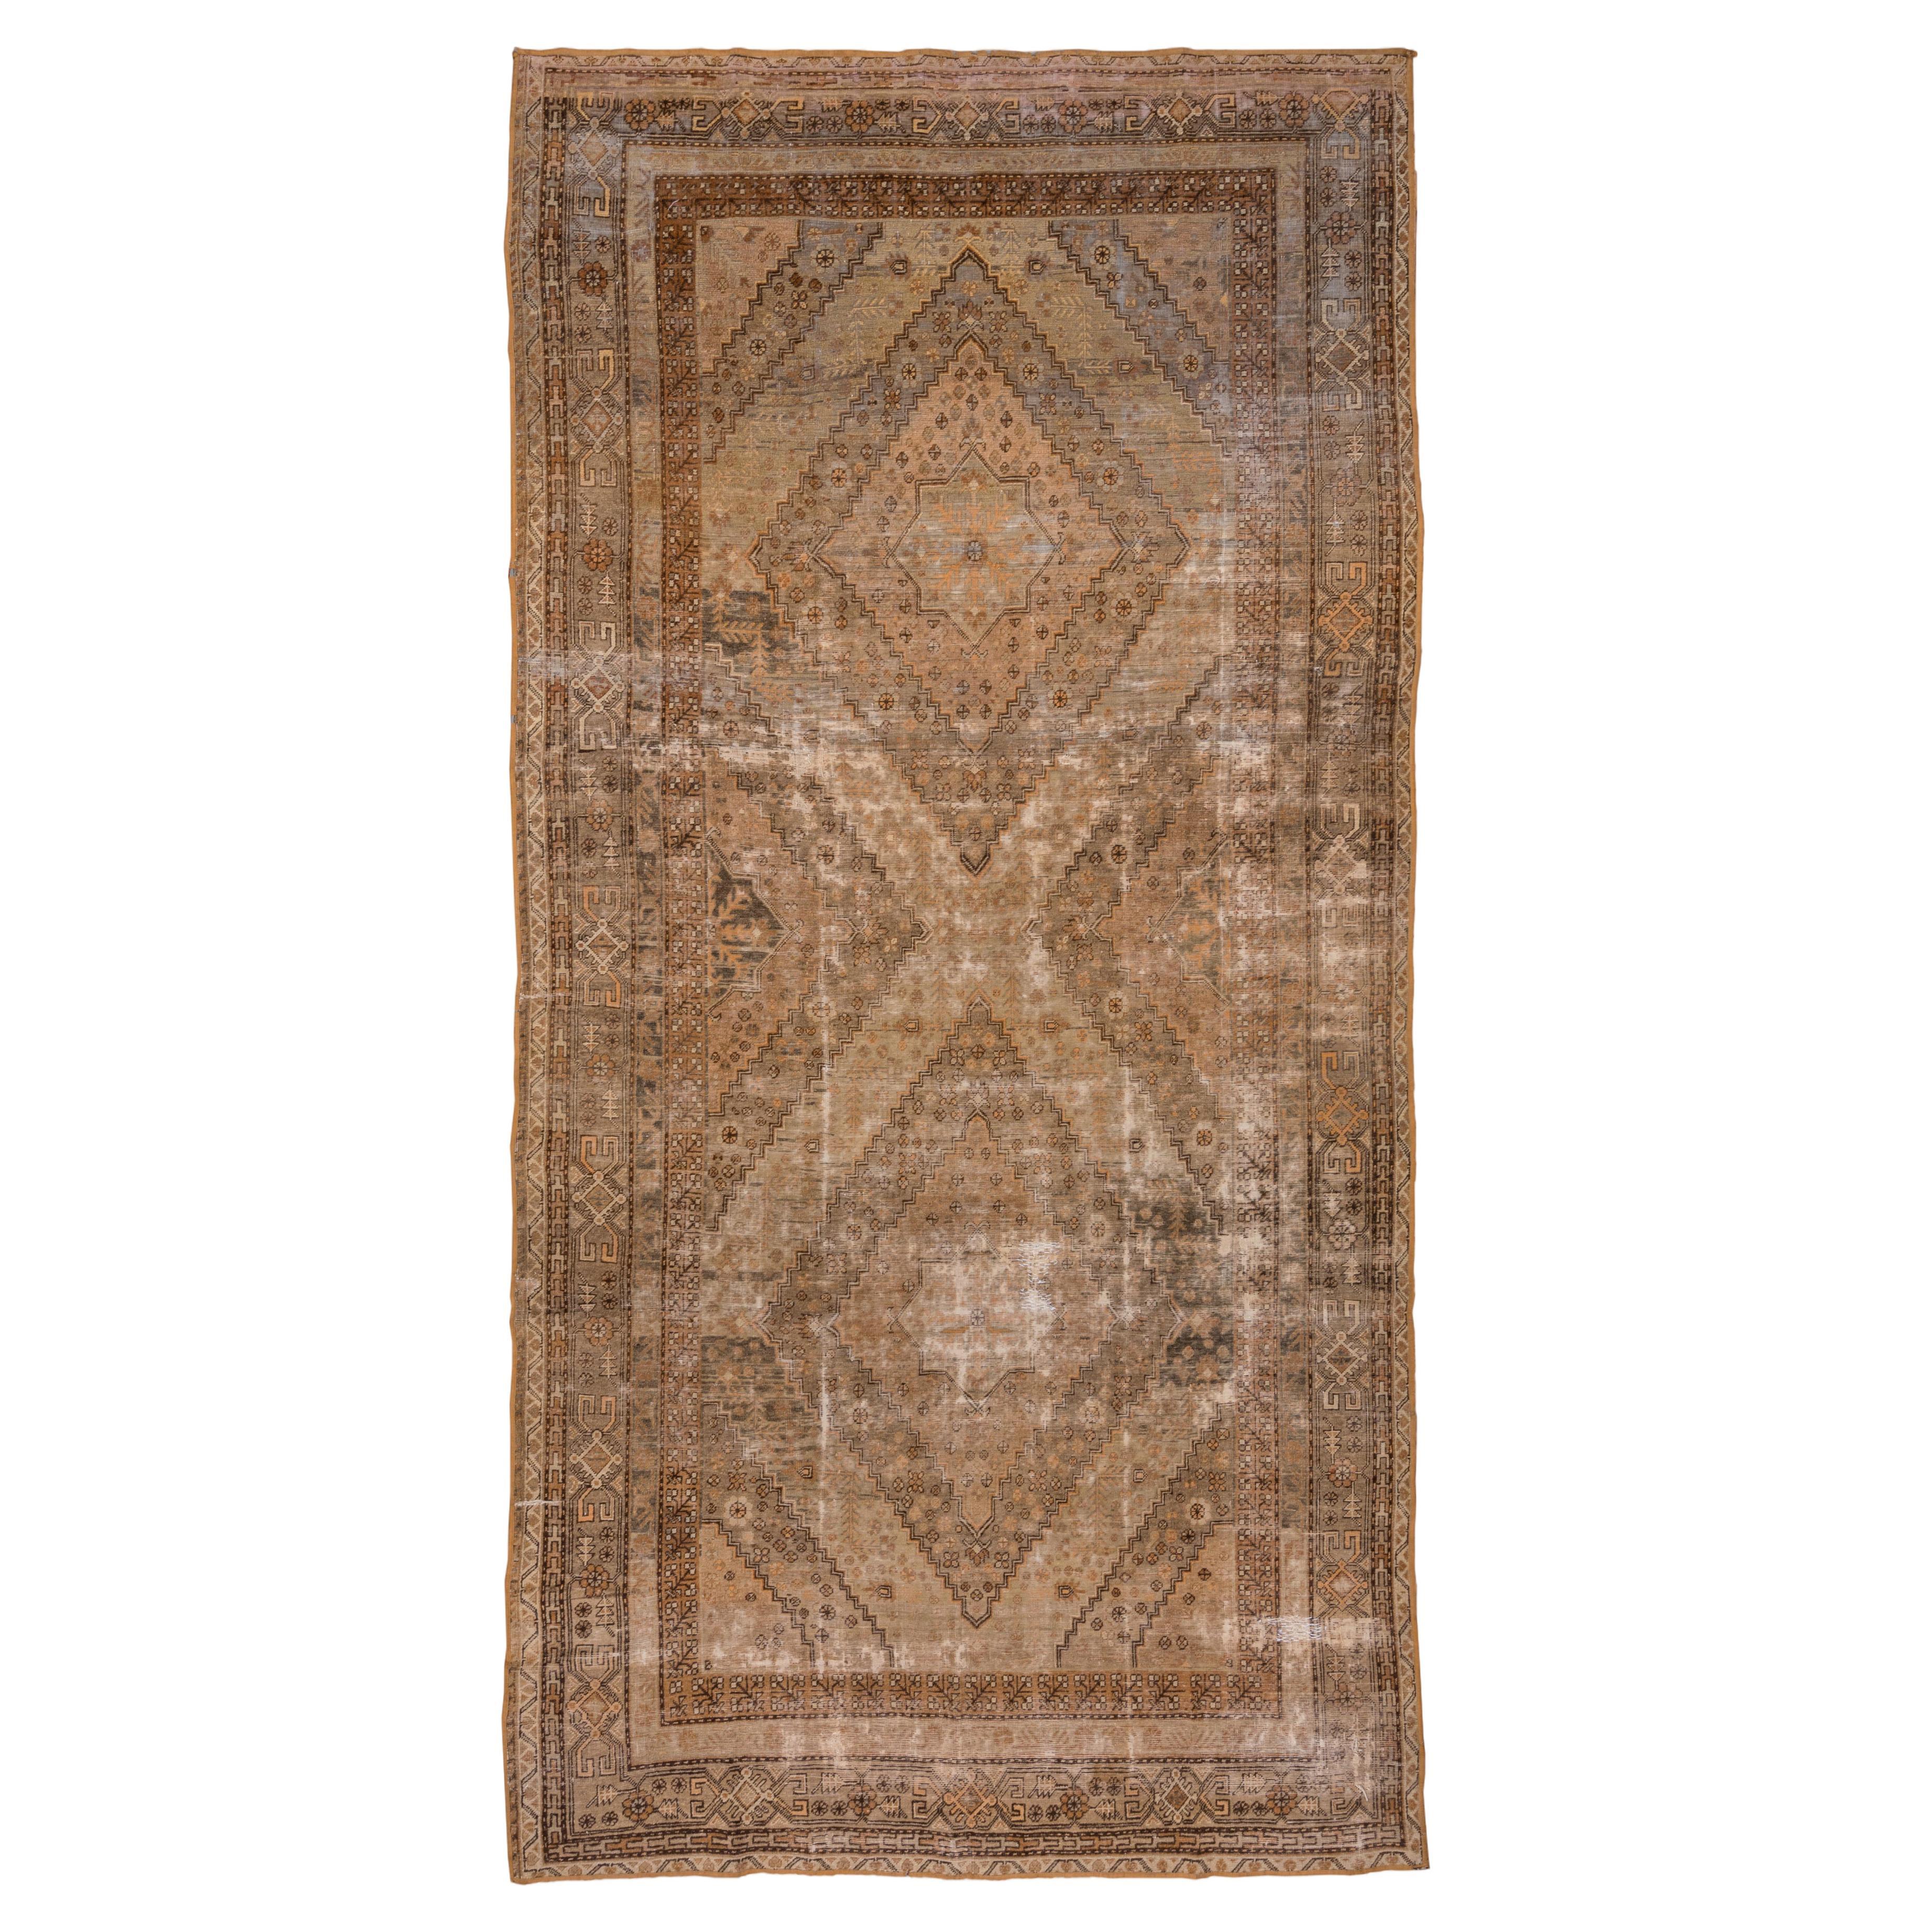 Turkish Antique Shabby Chic Collection Rug 1960 For Sale